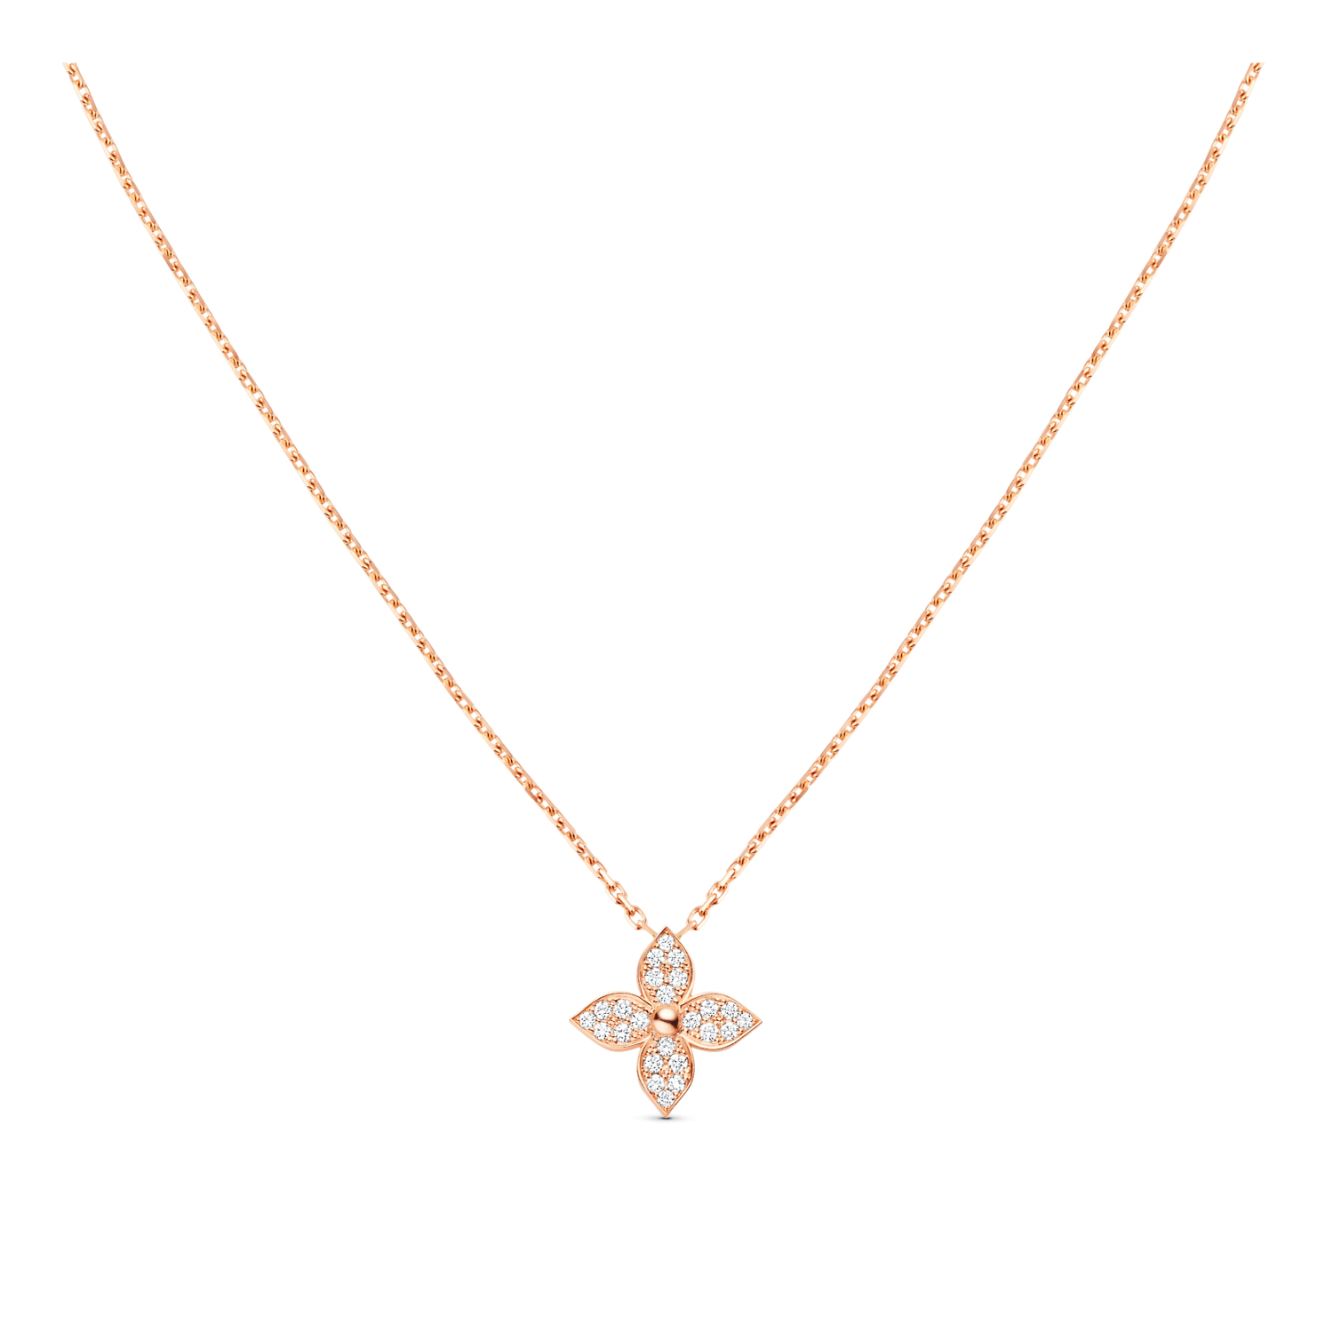 Louis Vuitton Star Blossom Pendant In Pink Gold And Diamonds - Vitkac shop  online